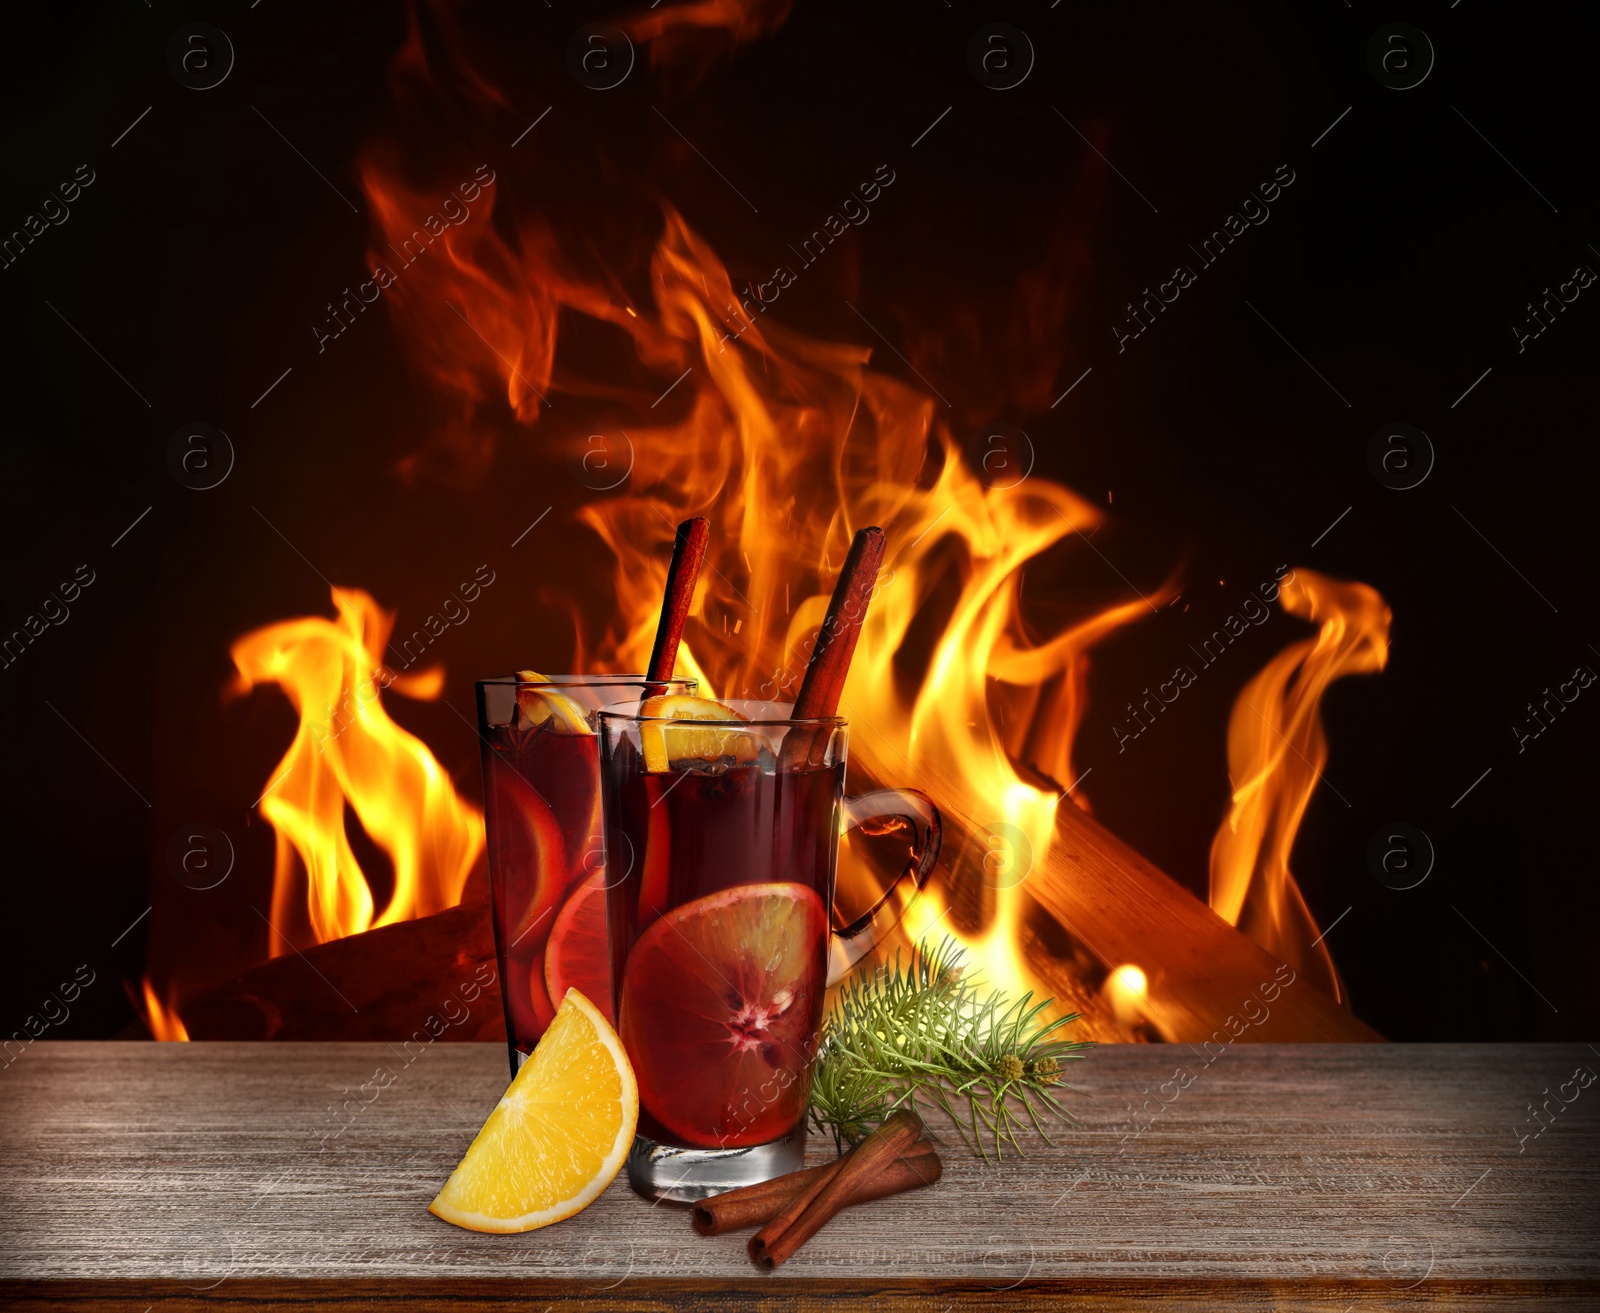 Image of Mulled wine on wooden table near fireplace